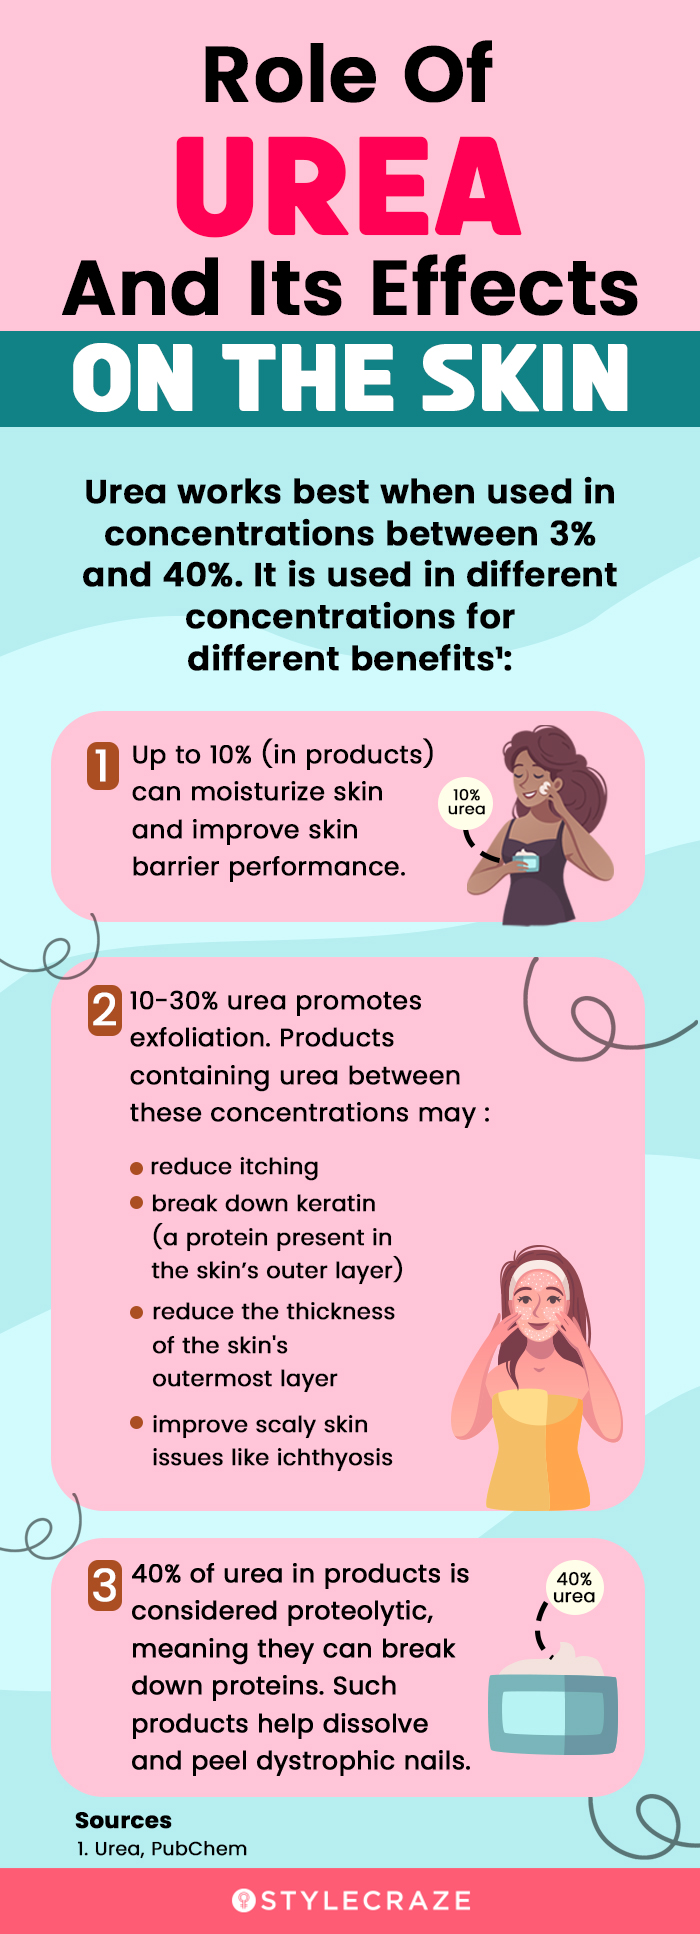 role of urea and its effects on the skin (infographic)